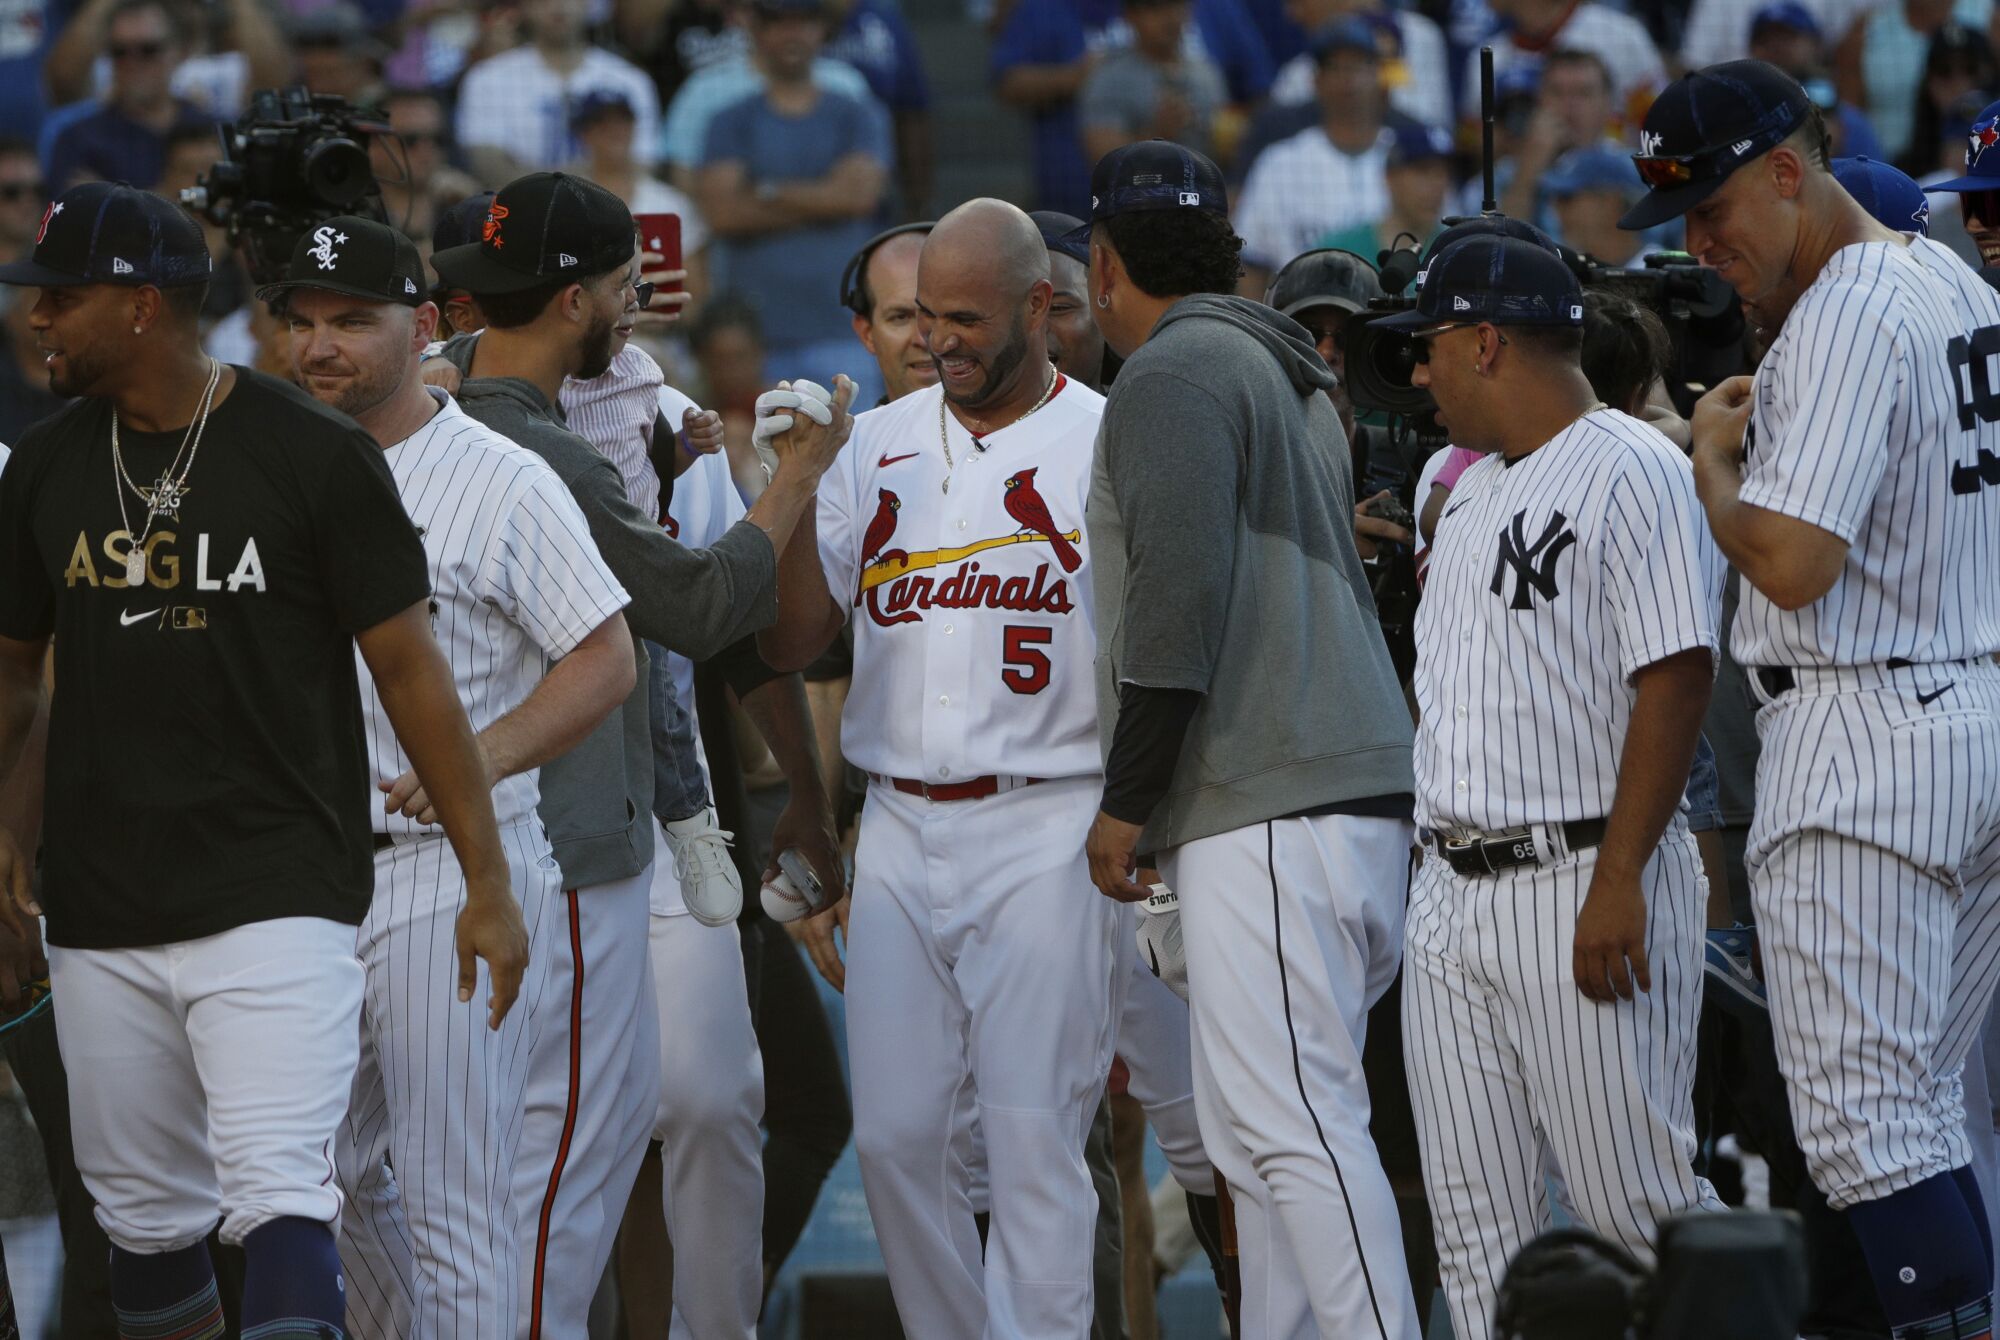 Fellow All-Stars paid tribute to Albert Pujols (5) during a home derby match at Dodger Stadium on July 18, 2022.